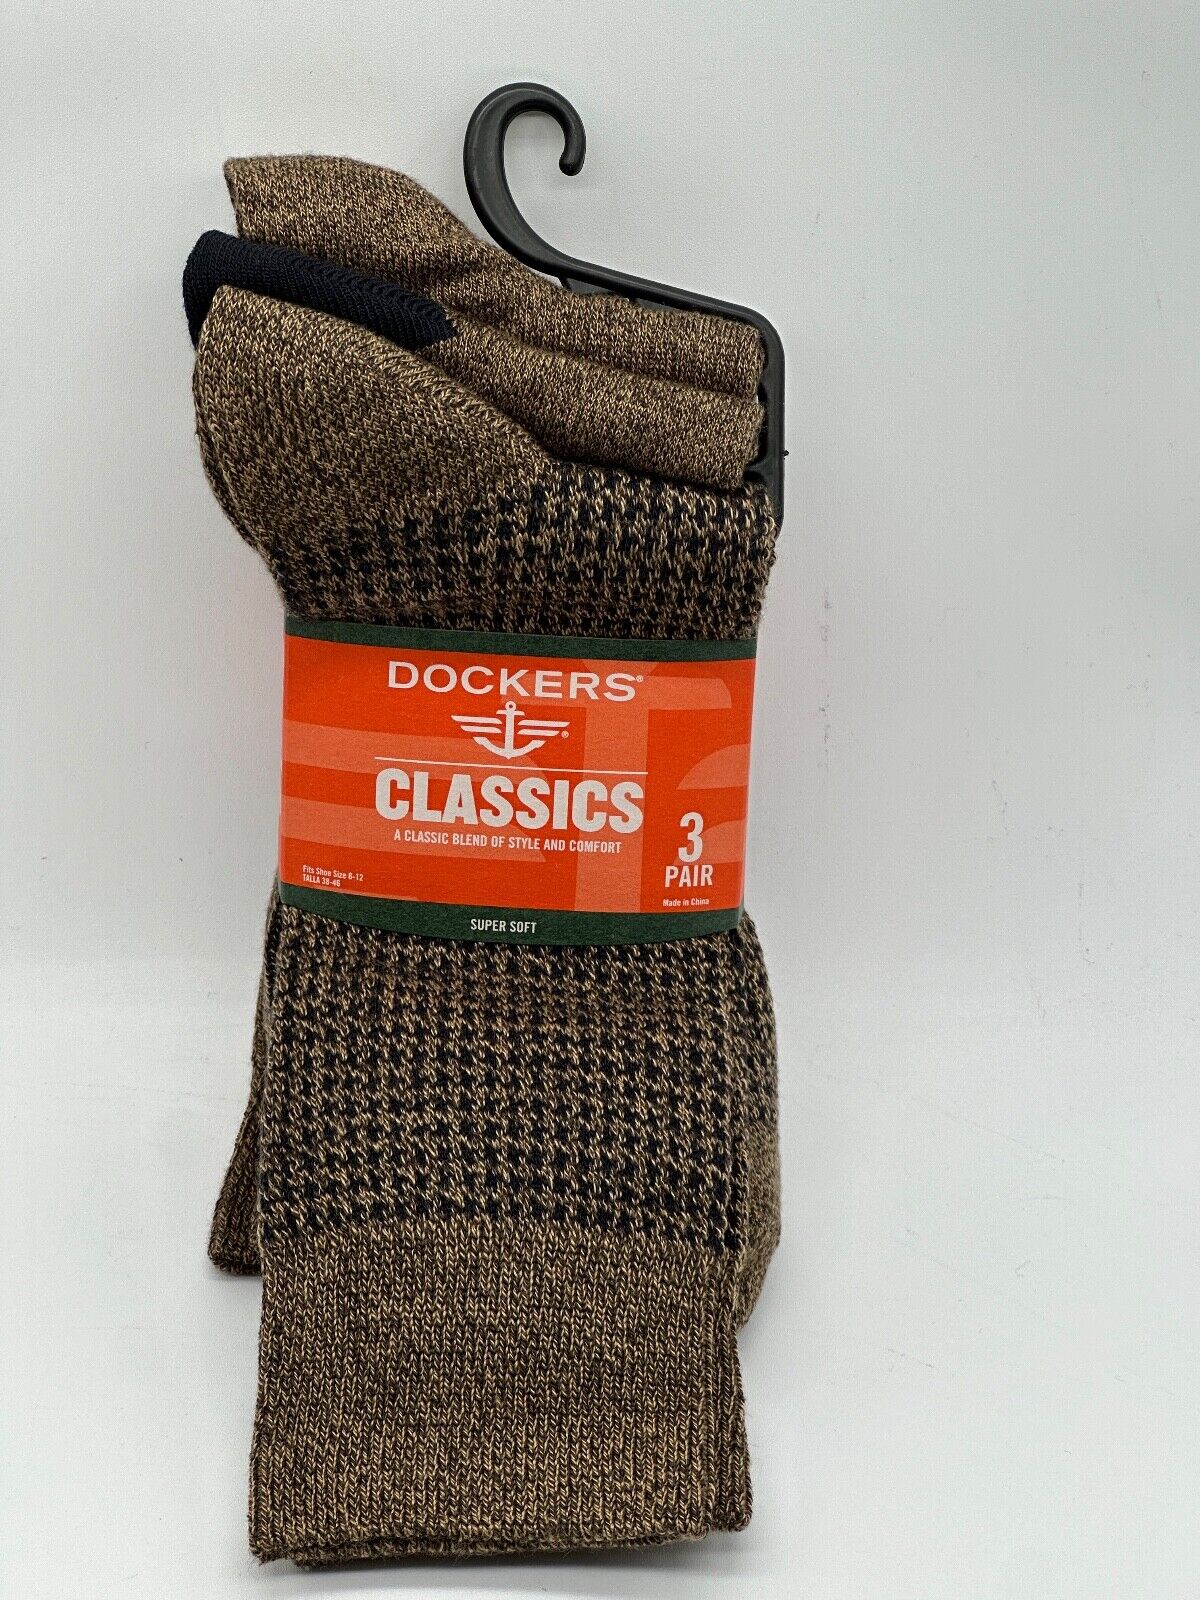 NEW 3 PAIRS PACK MENS DOCKERS SUPER SOFT  CLASSIC CREW SOCKS SIZE 6-12 NAVY